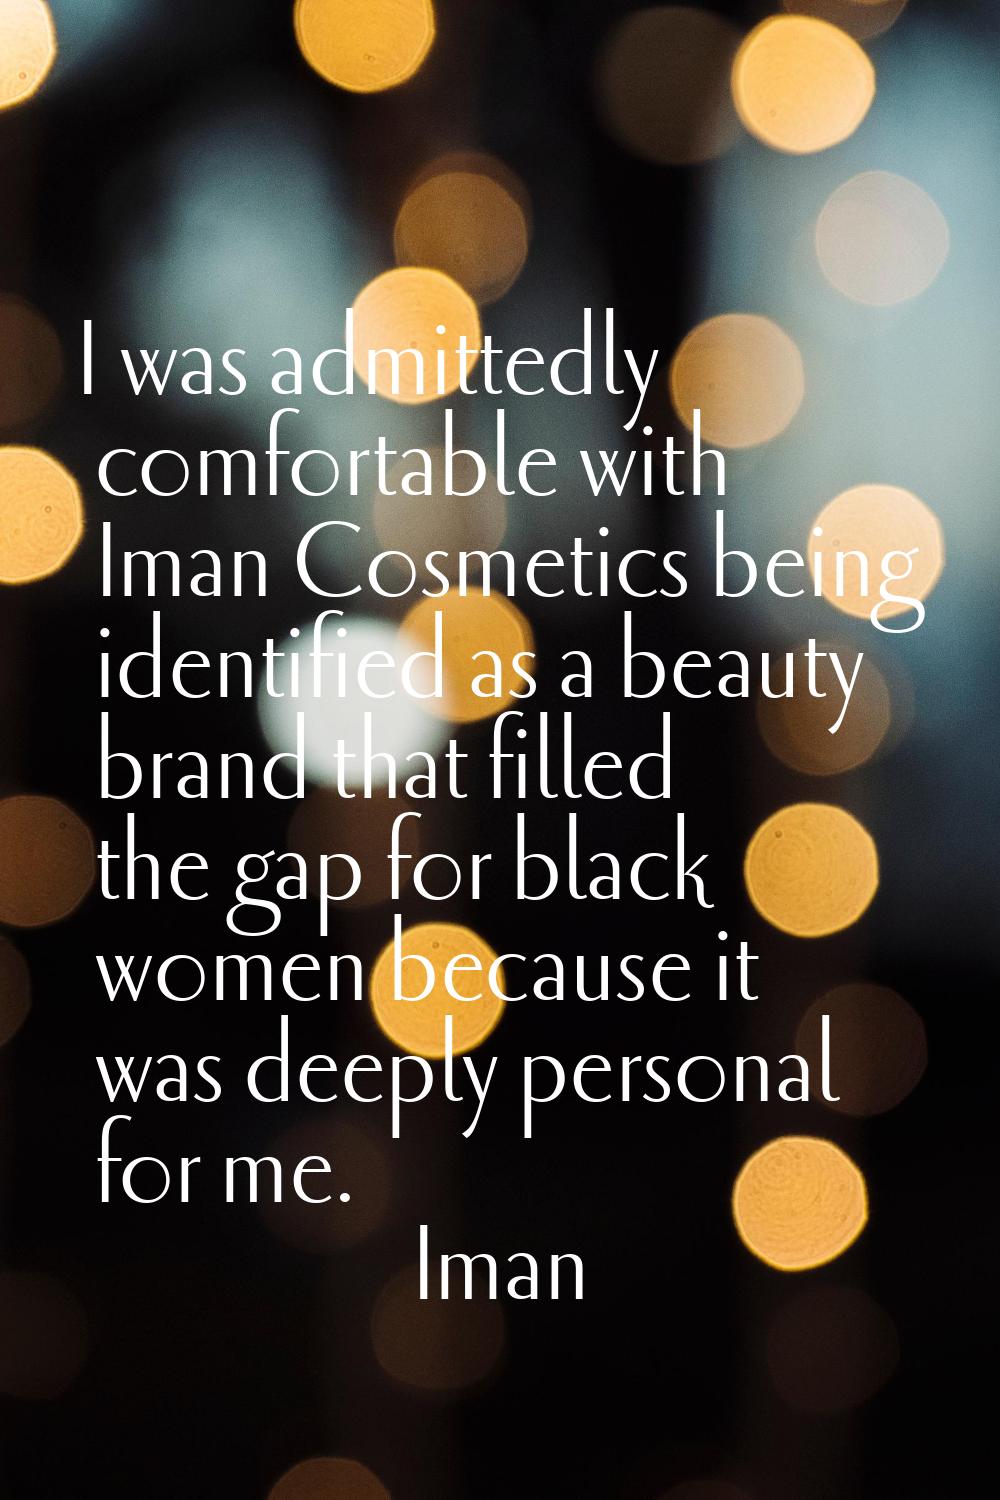 I was admittedly comfortable with Iman Cosmetics being identified as a beauty brand that filled the